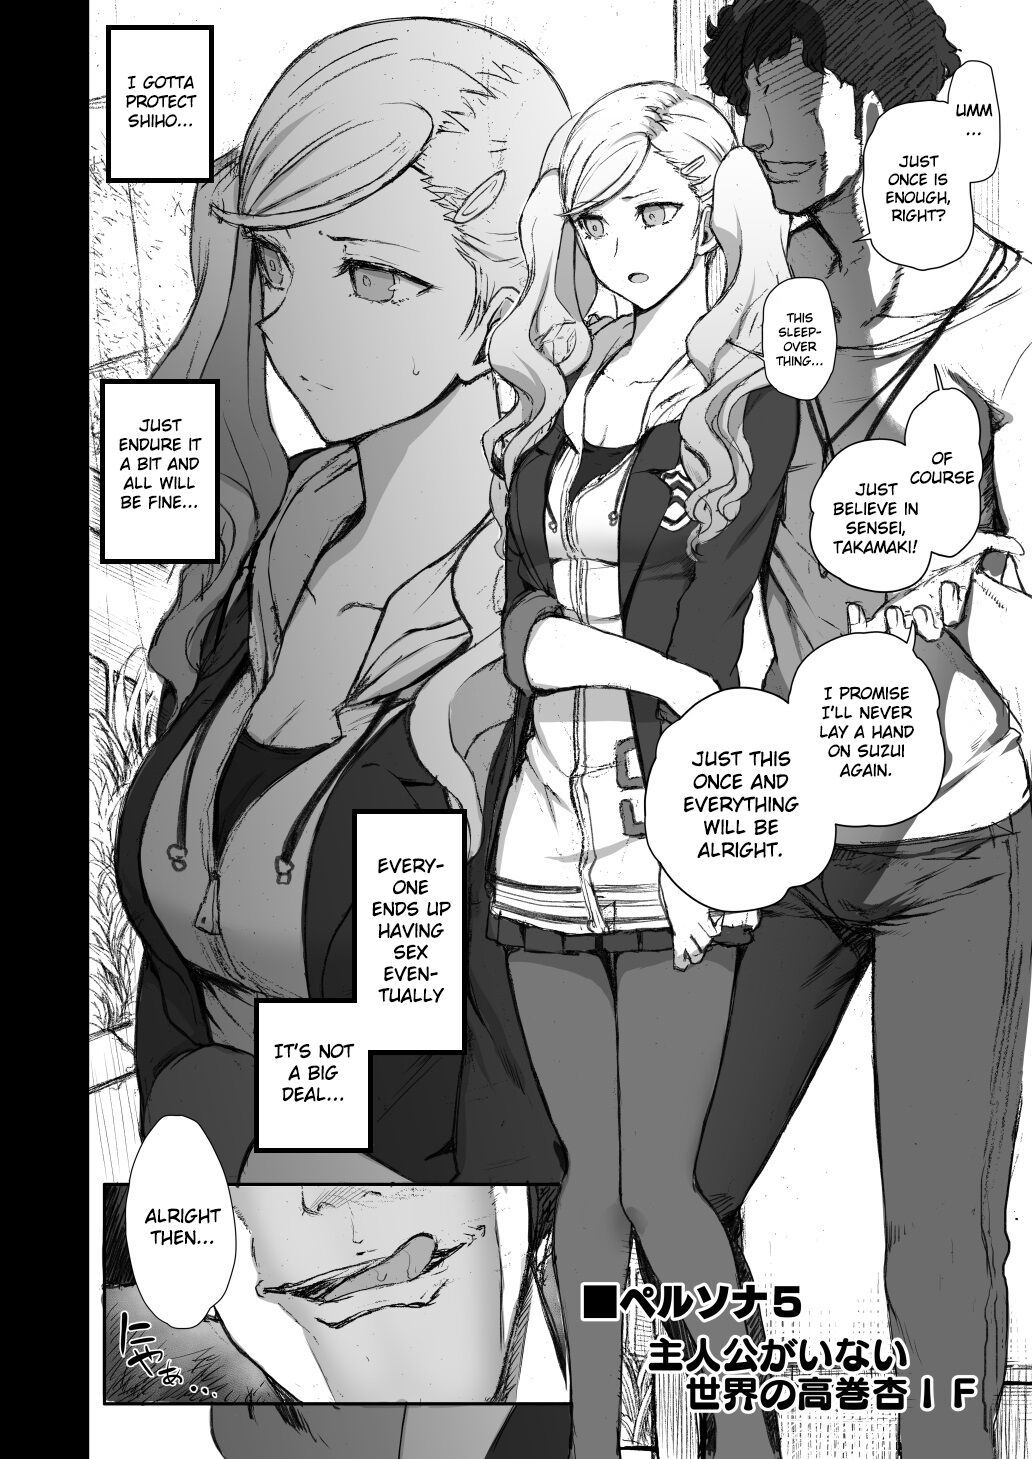 P5: A World Without the Protagonist - Ann's IF by "Aiue Oka" - #173428 - Read hentai Doujinshi online for free at Cartoon Porn